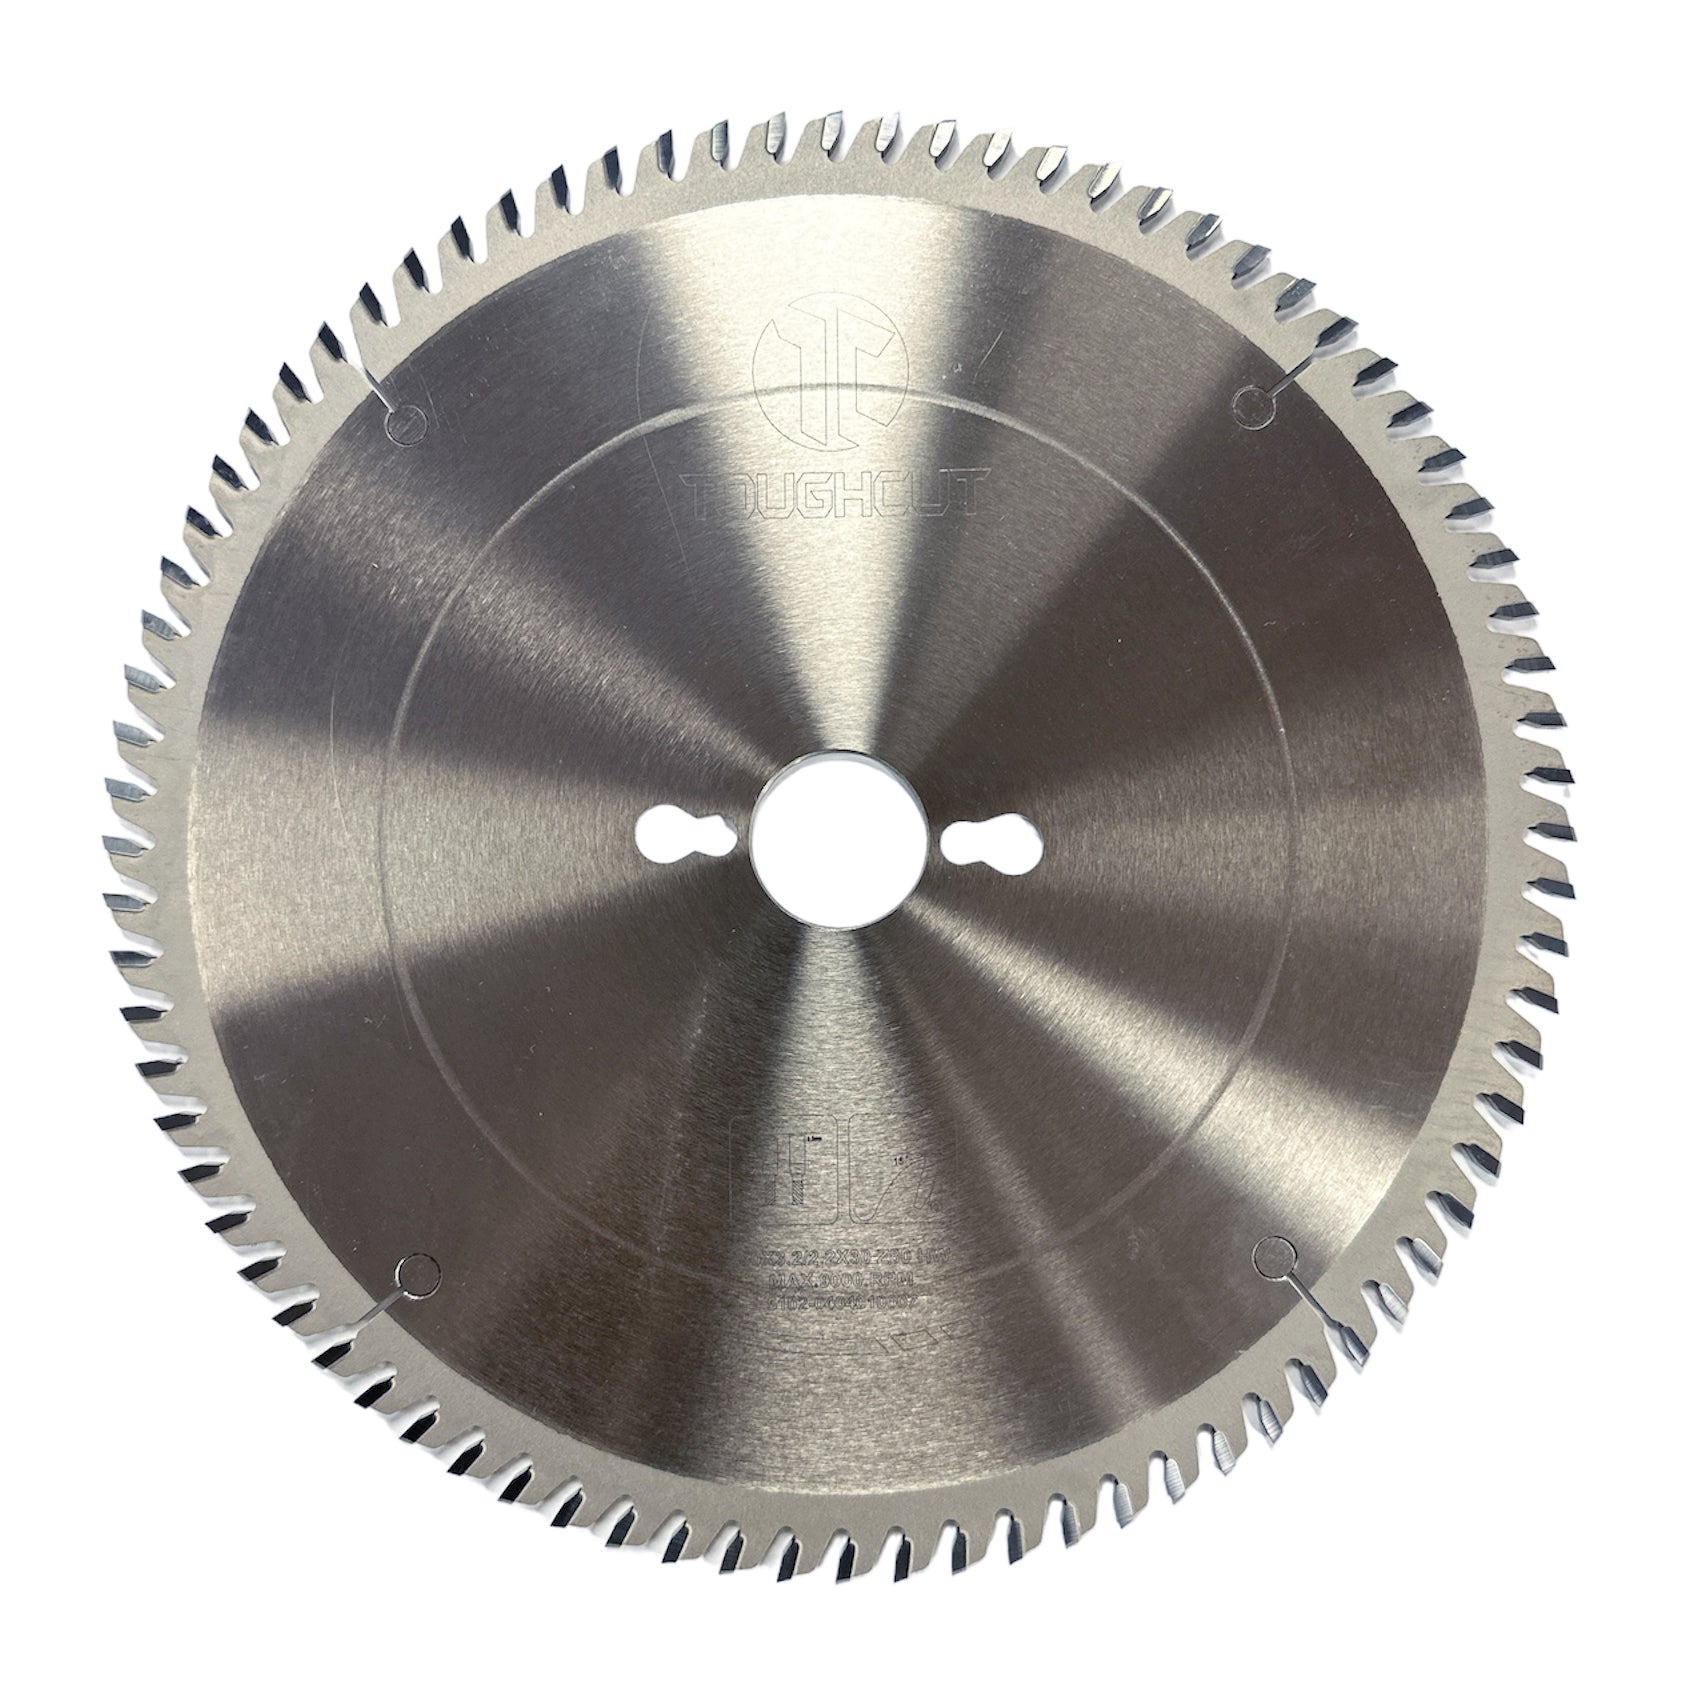 300mm x 30mm x 24T Tungsten Carbide Tipped ATB Circular Saw Blade suit Ripping by ToughCut